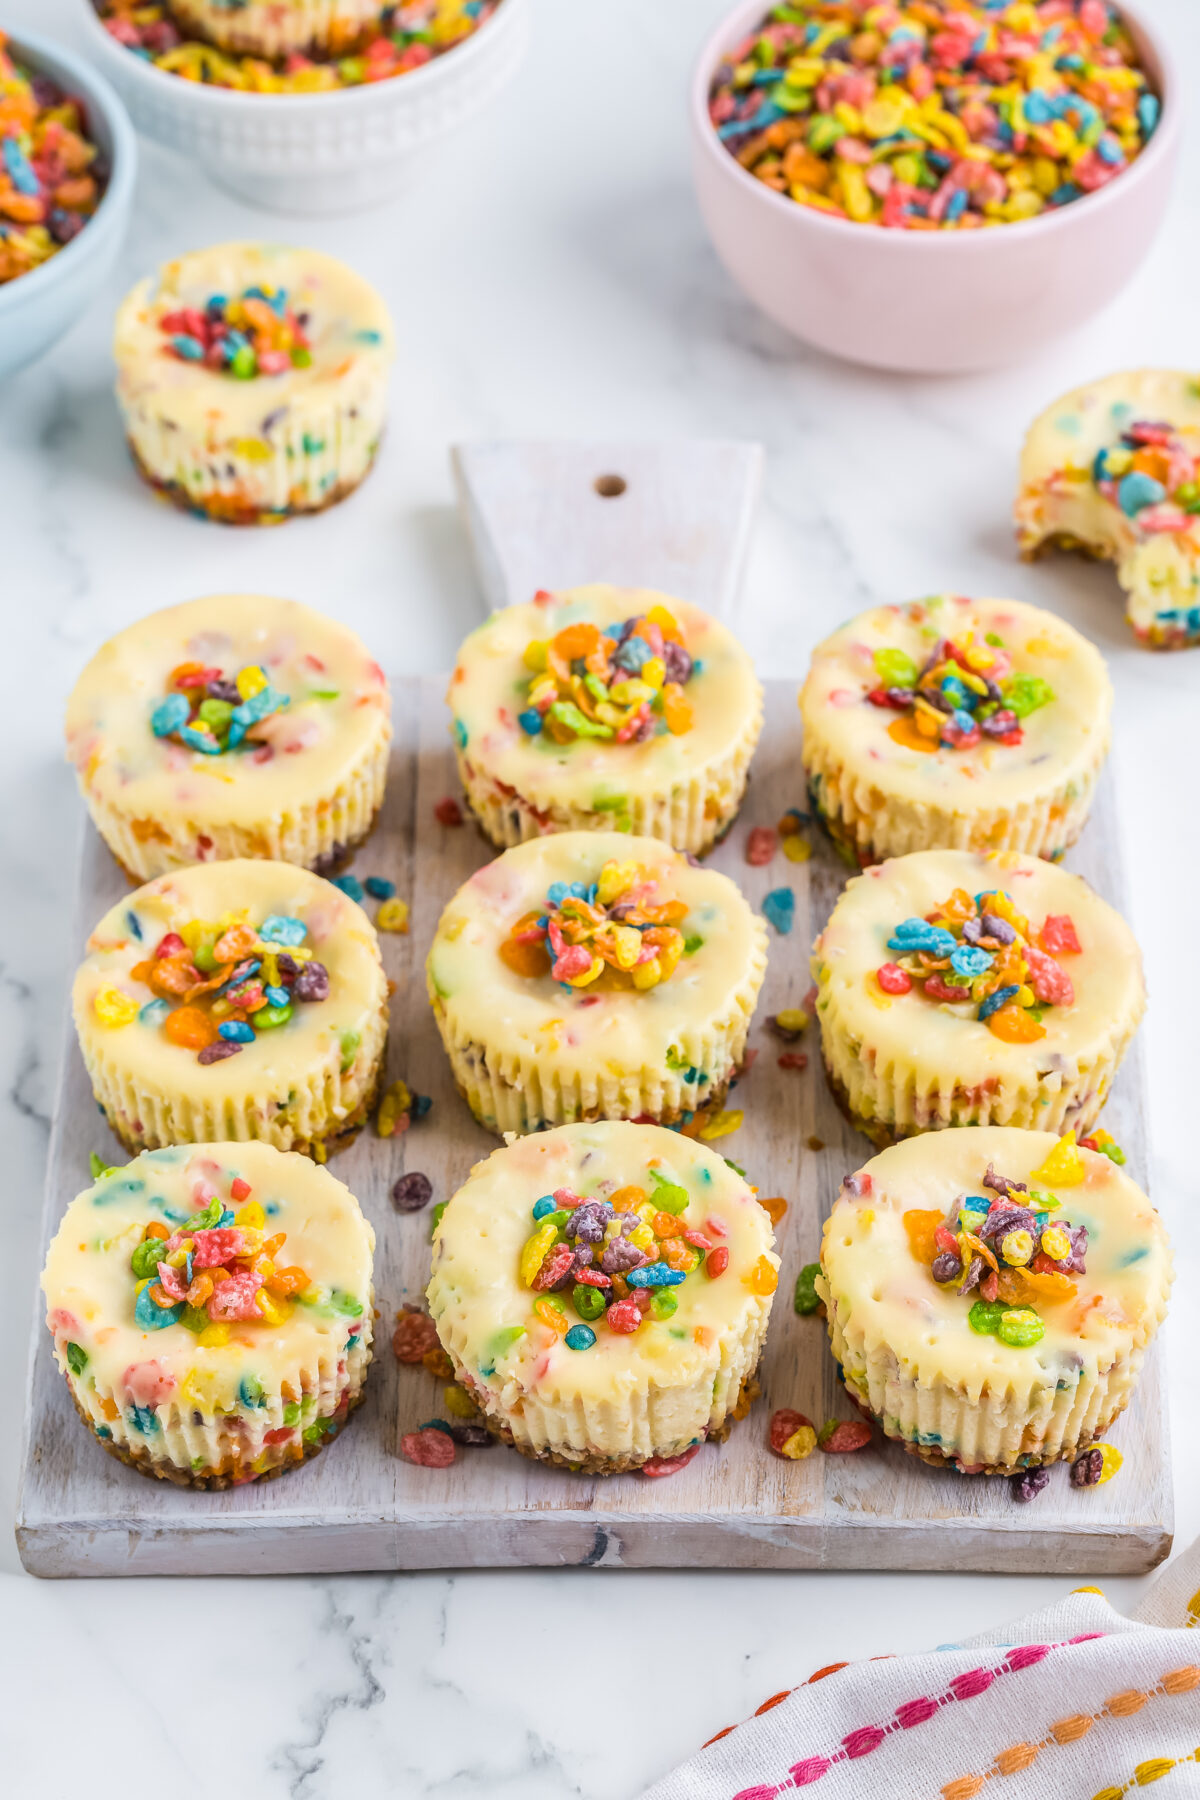 Love Fruity Pebbles cereal? Love cheesecake? Then you'll love this mini fruity pebbles cheesecake recipe! It's delicious and loads of fun!